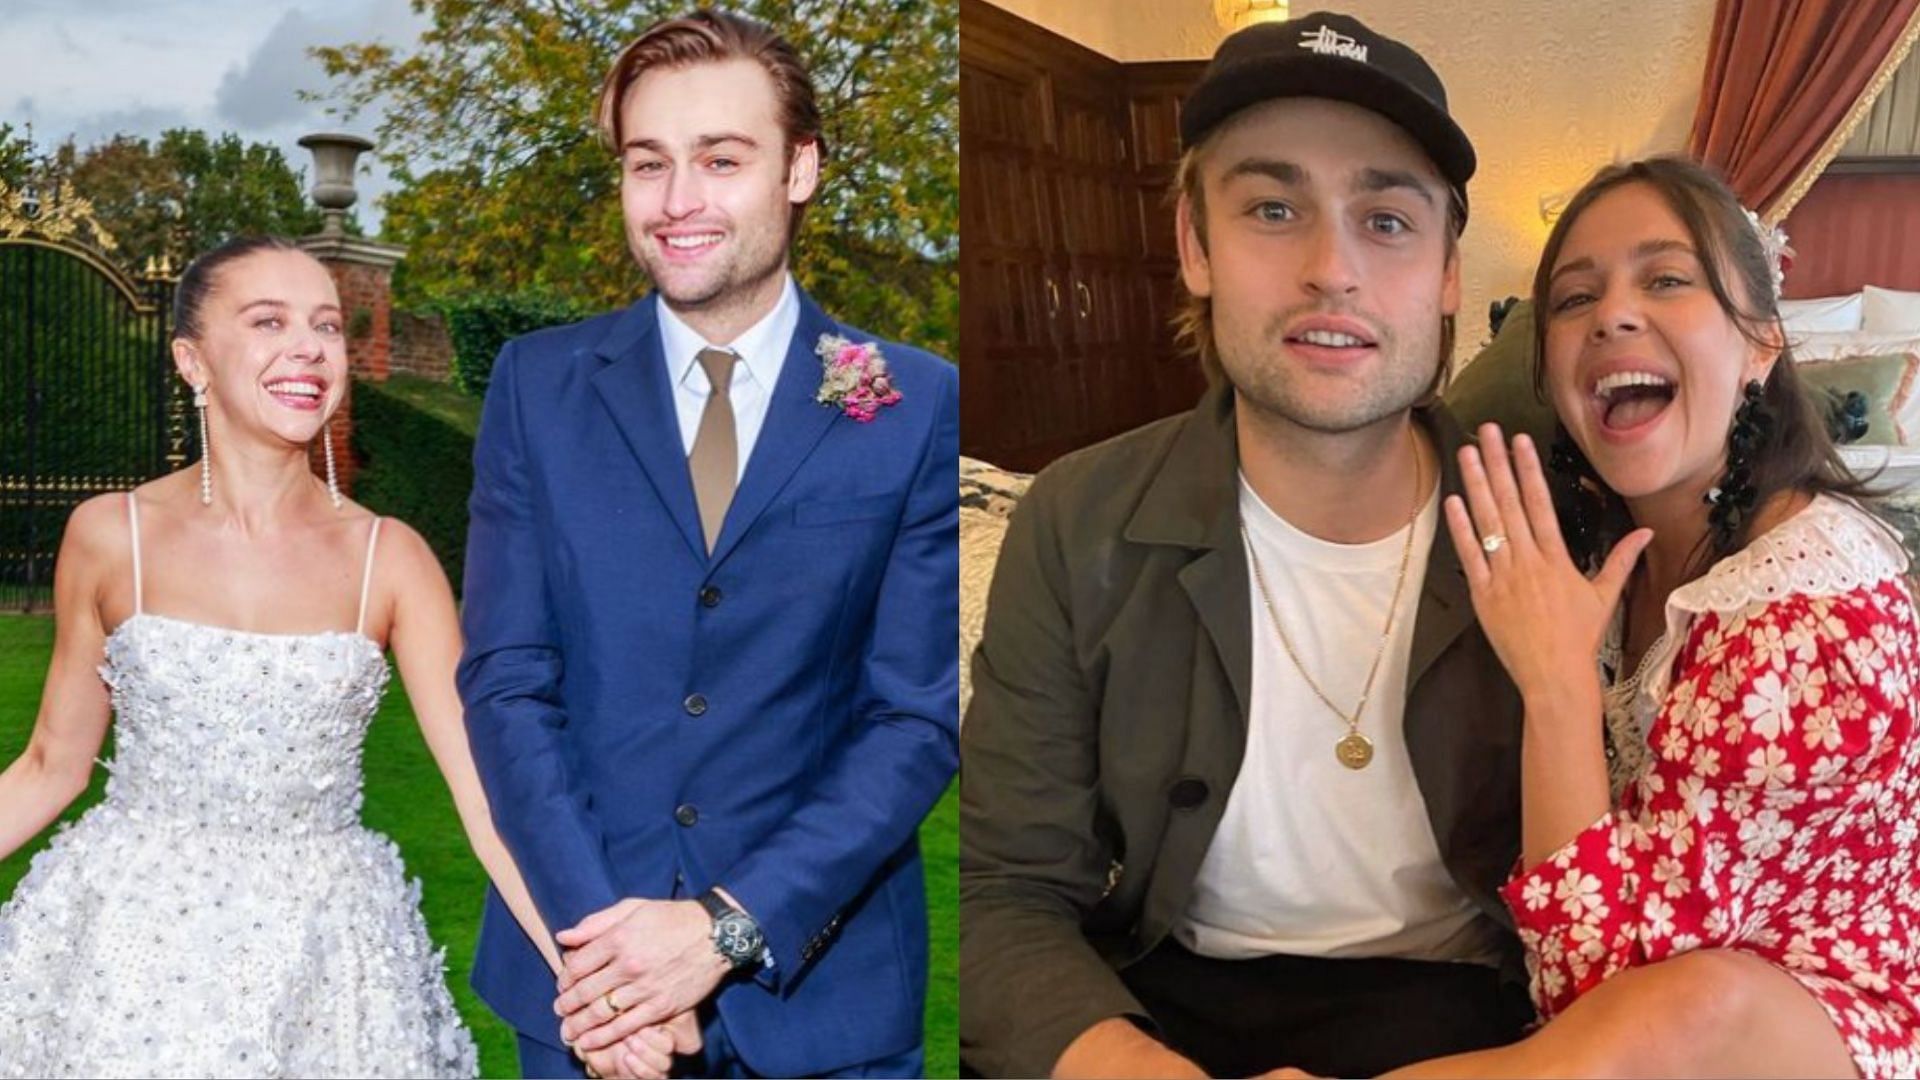 Douglas Booth and longtime partner Bel Powley got married in a &quot;love filled&quot; wedding ceremony in London. (Image via Instagram/@belpowley)